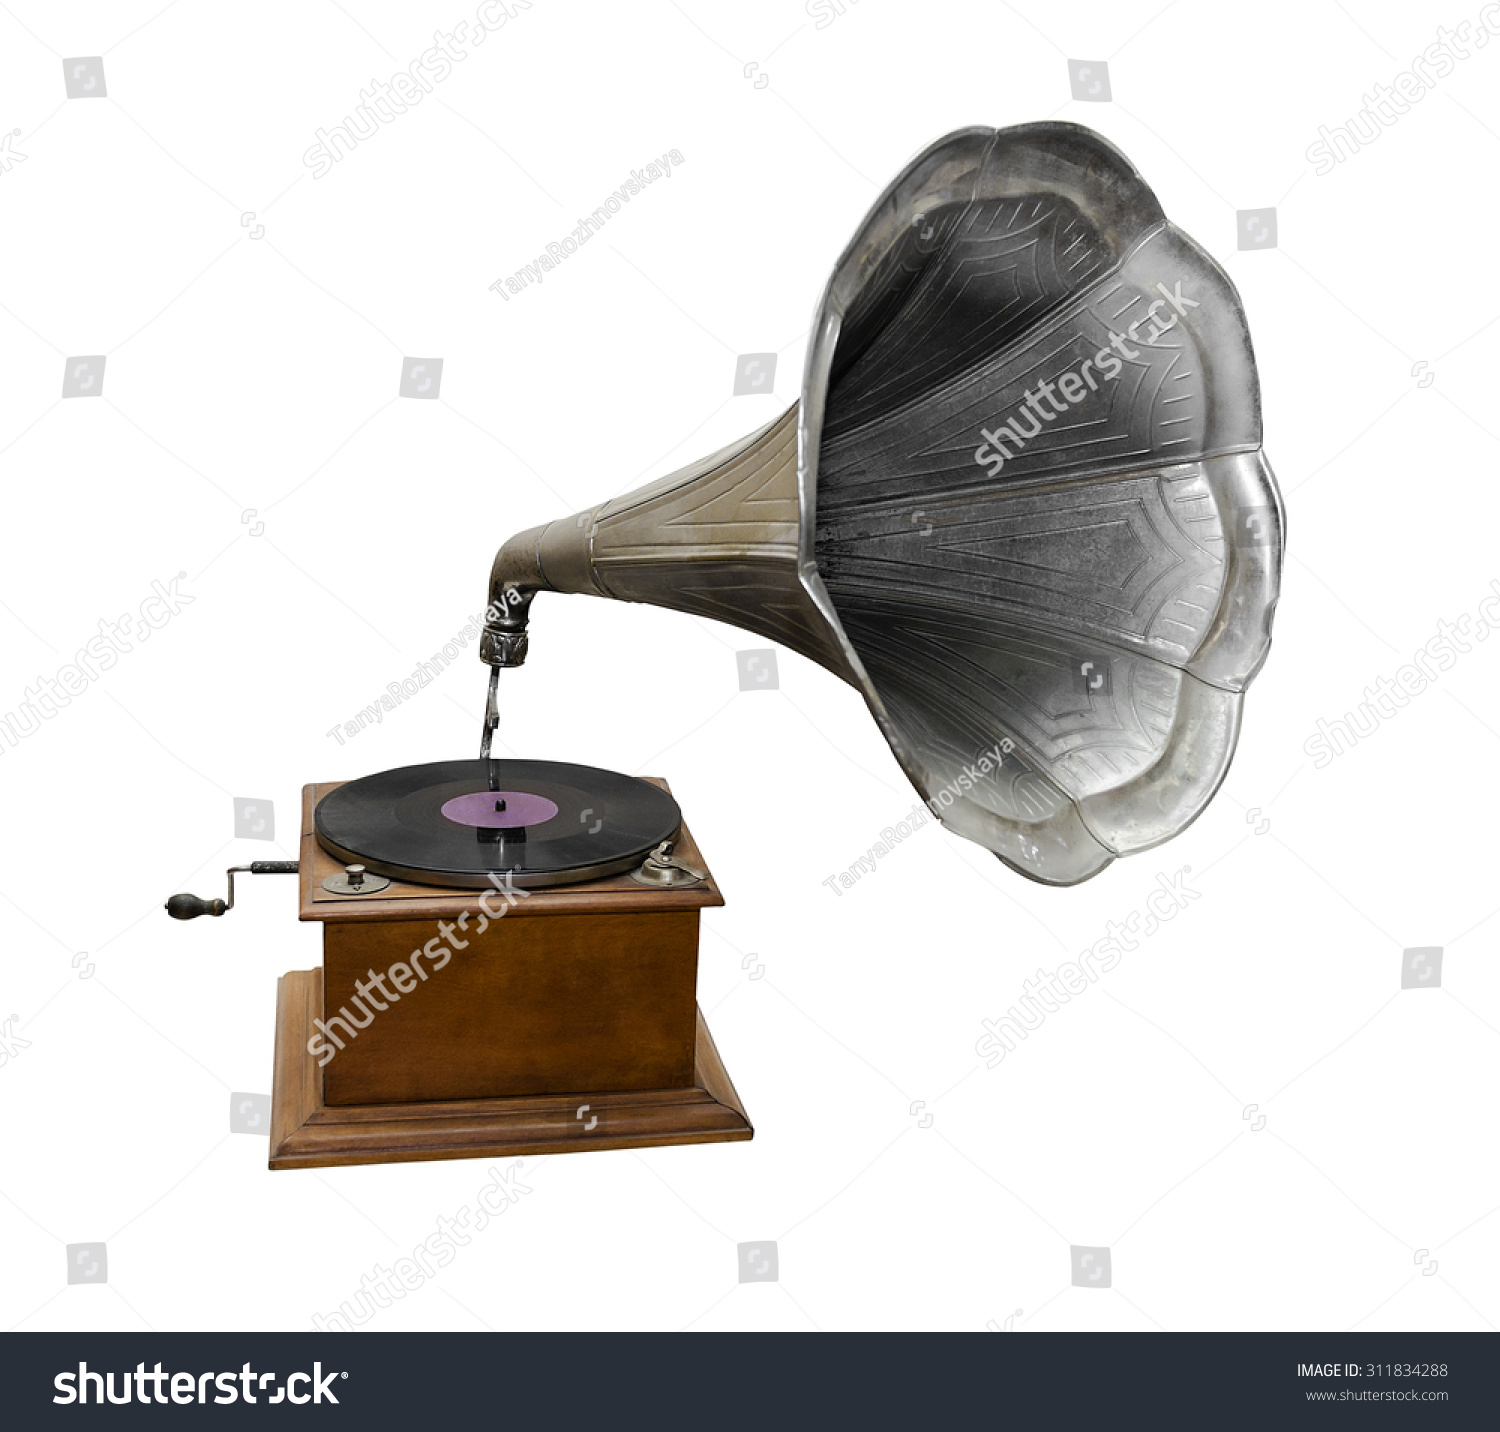 Retro gramophone isolated on a white background. #311834288